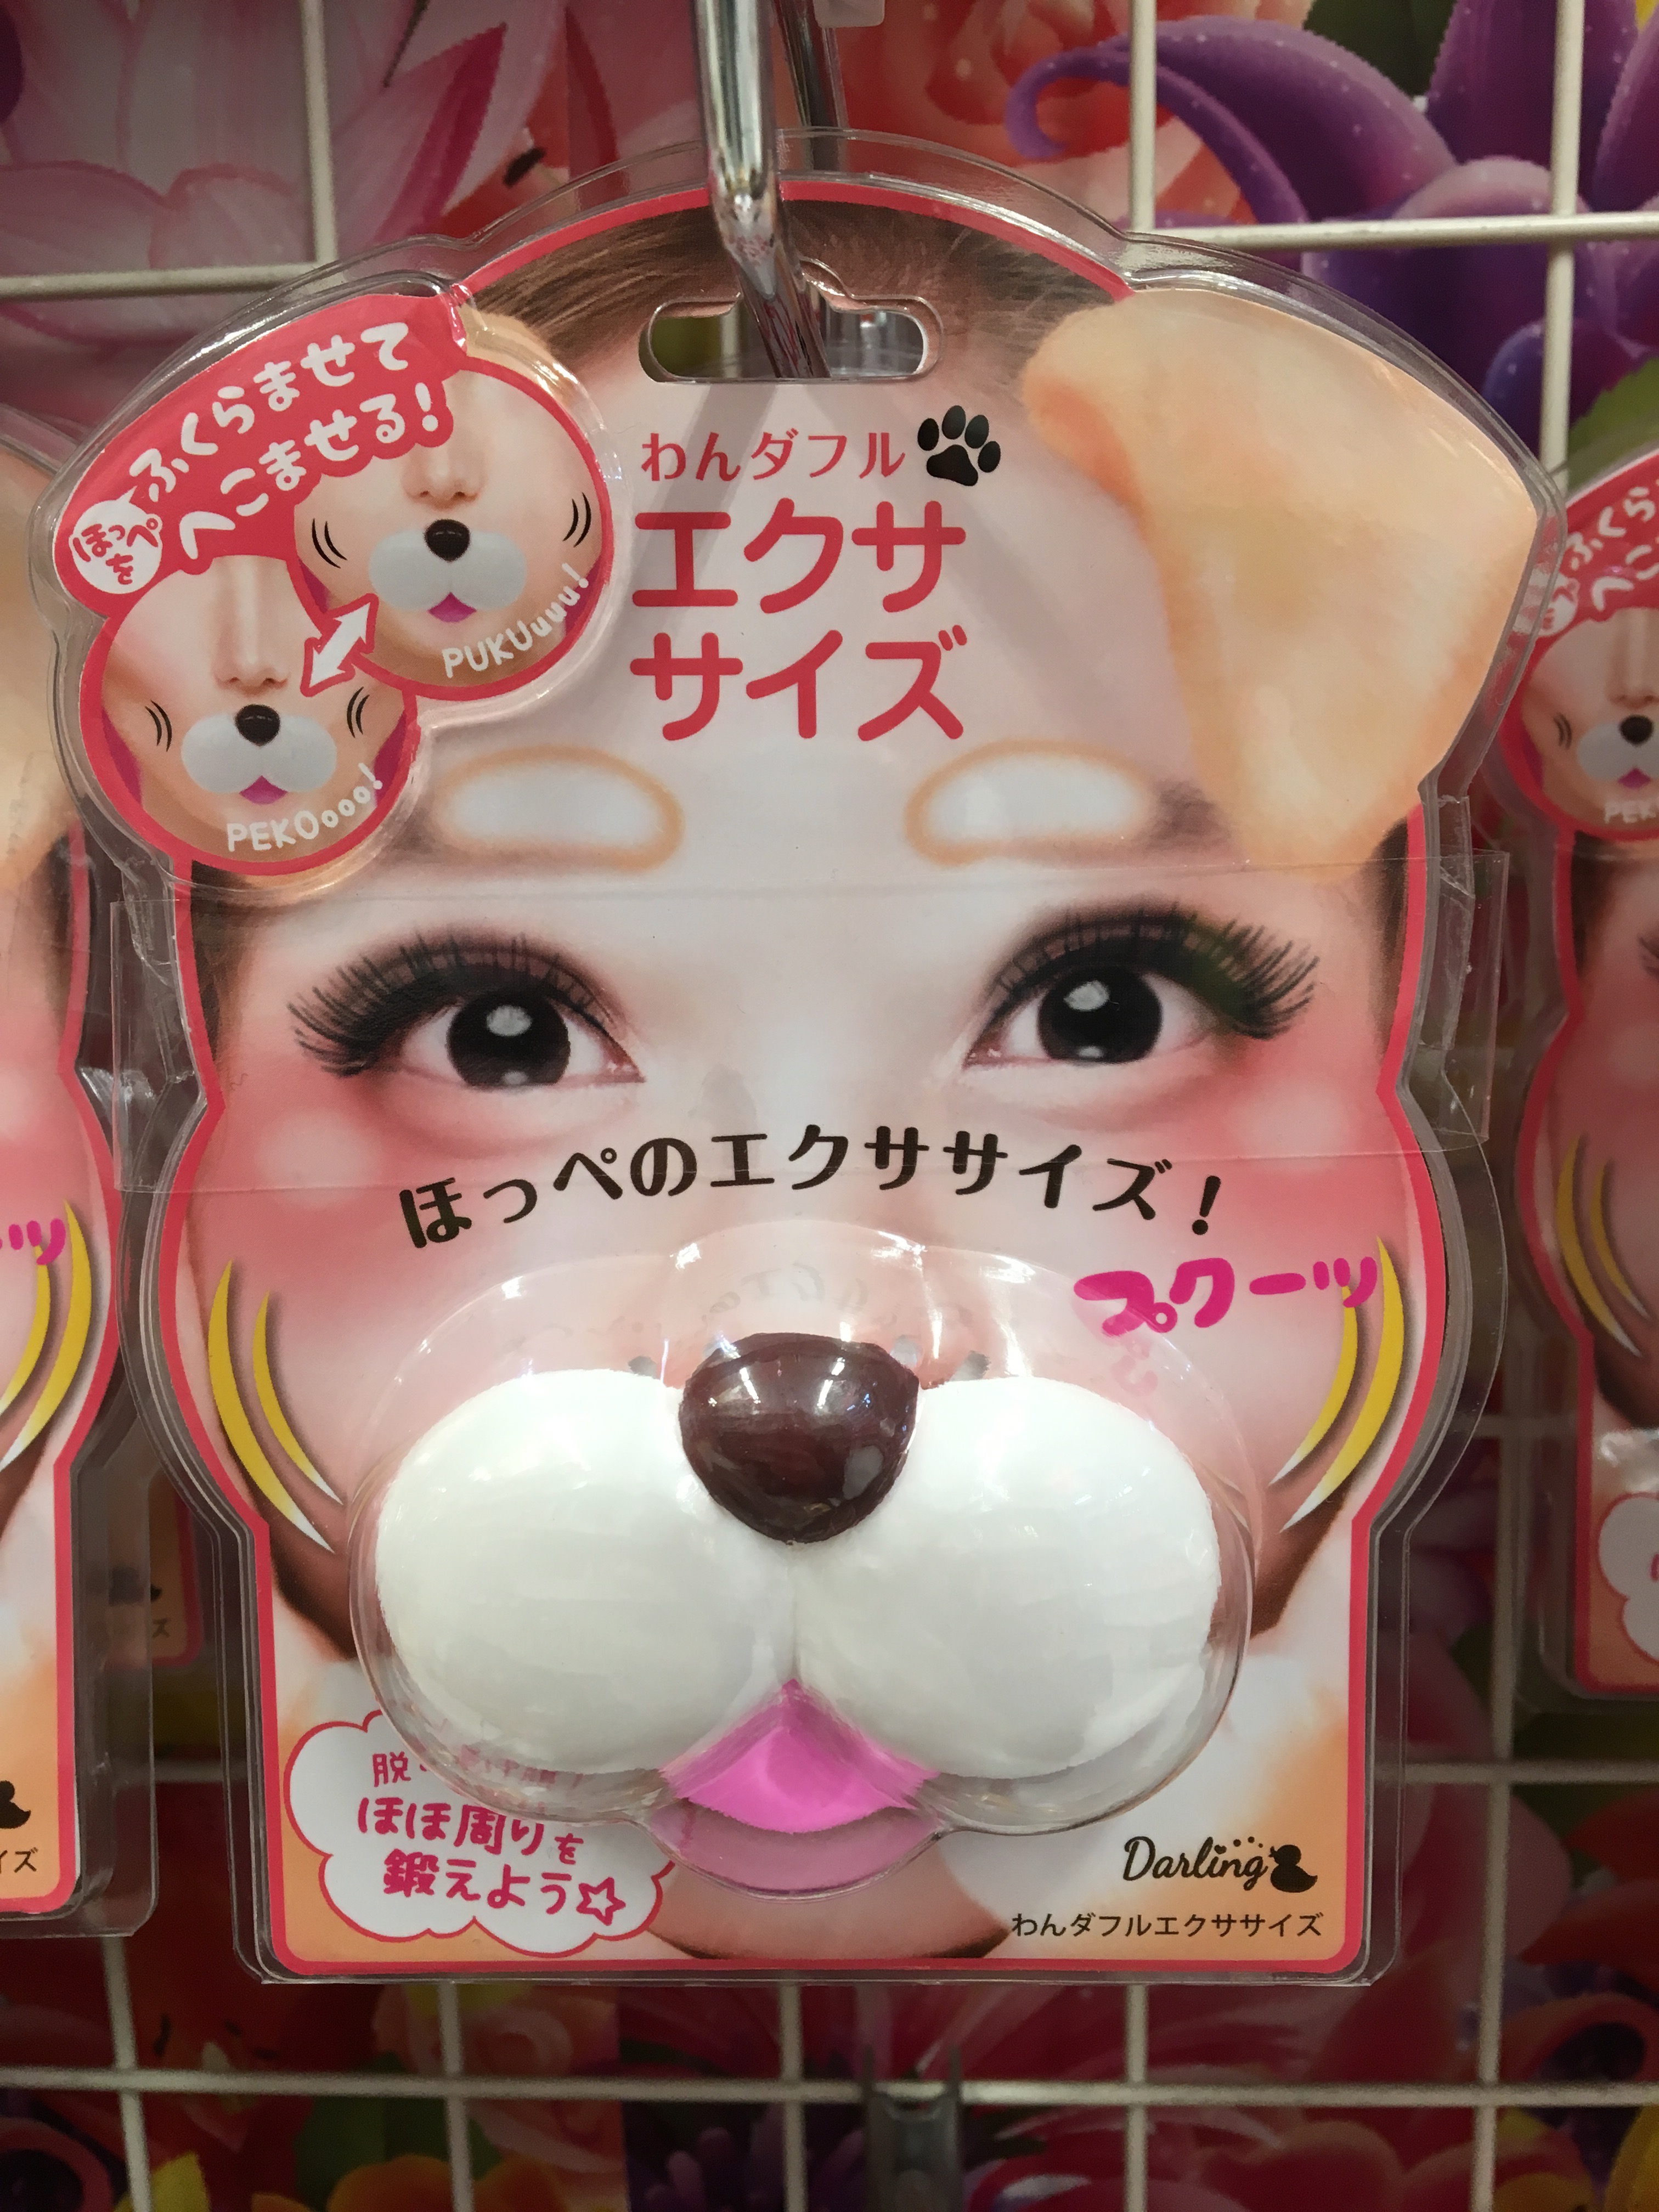 Don Quijote Cosme Darling mask